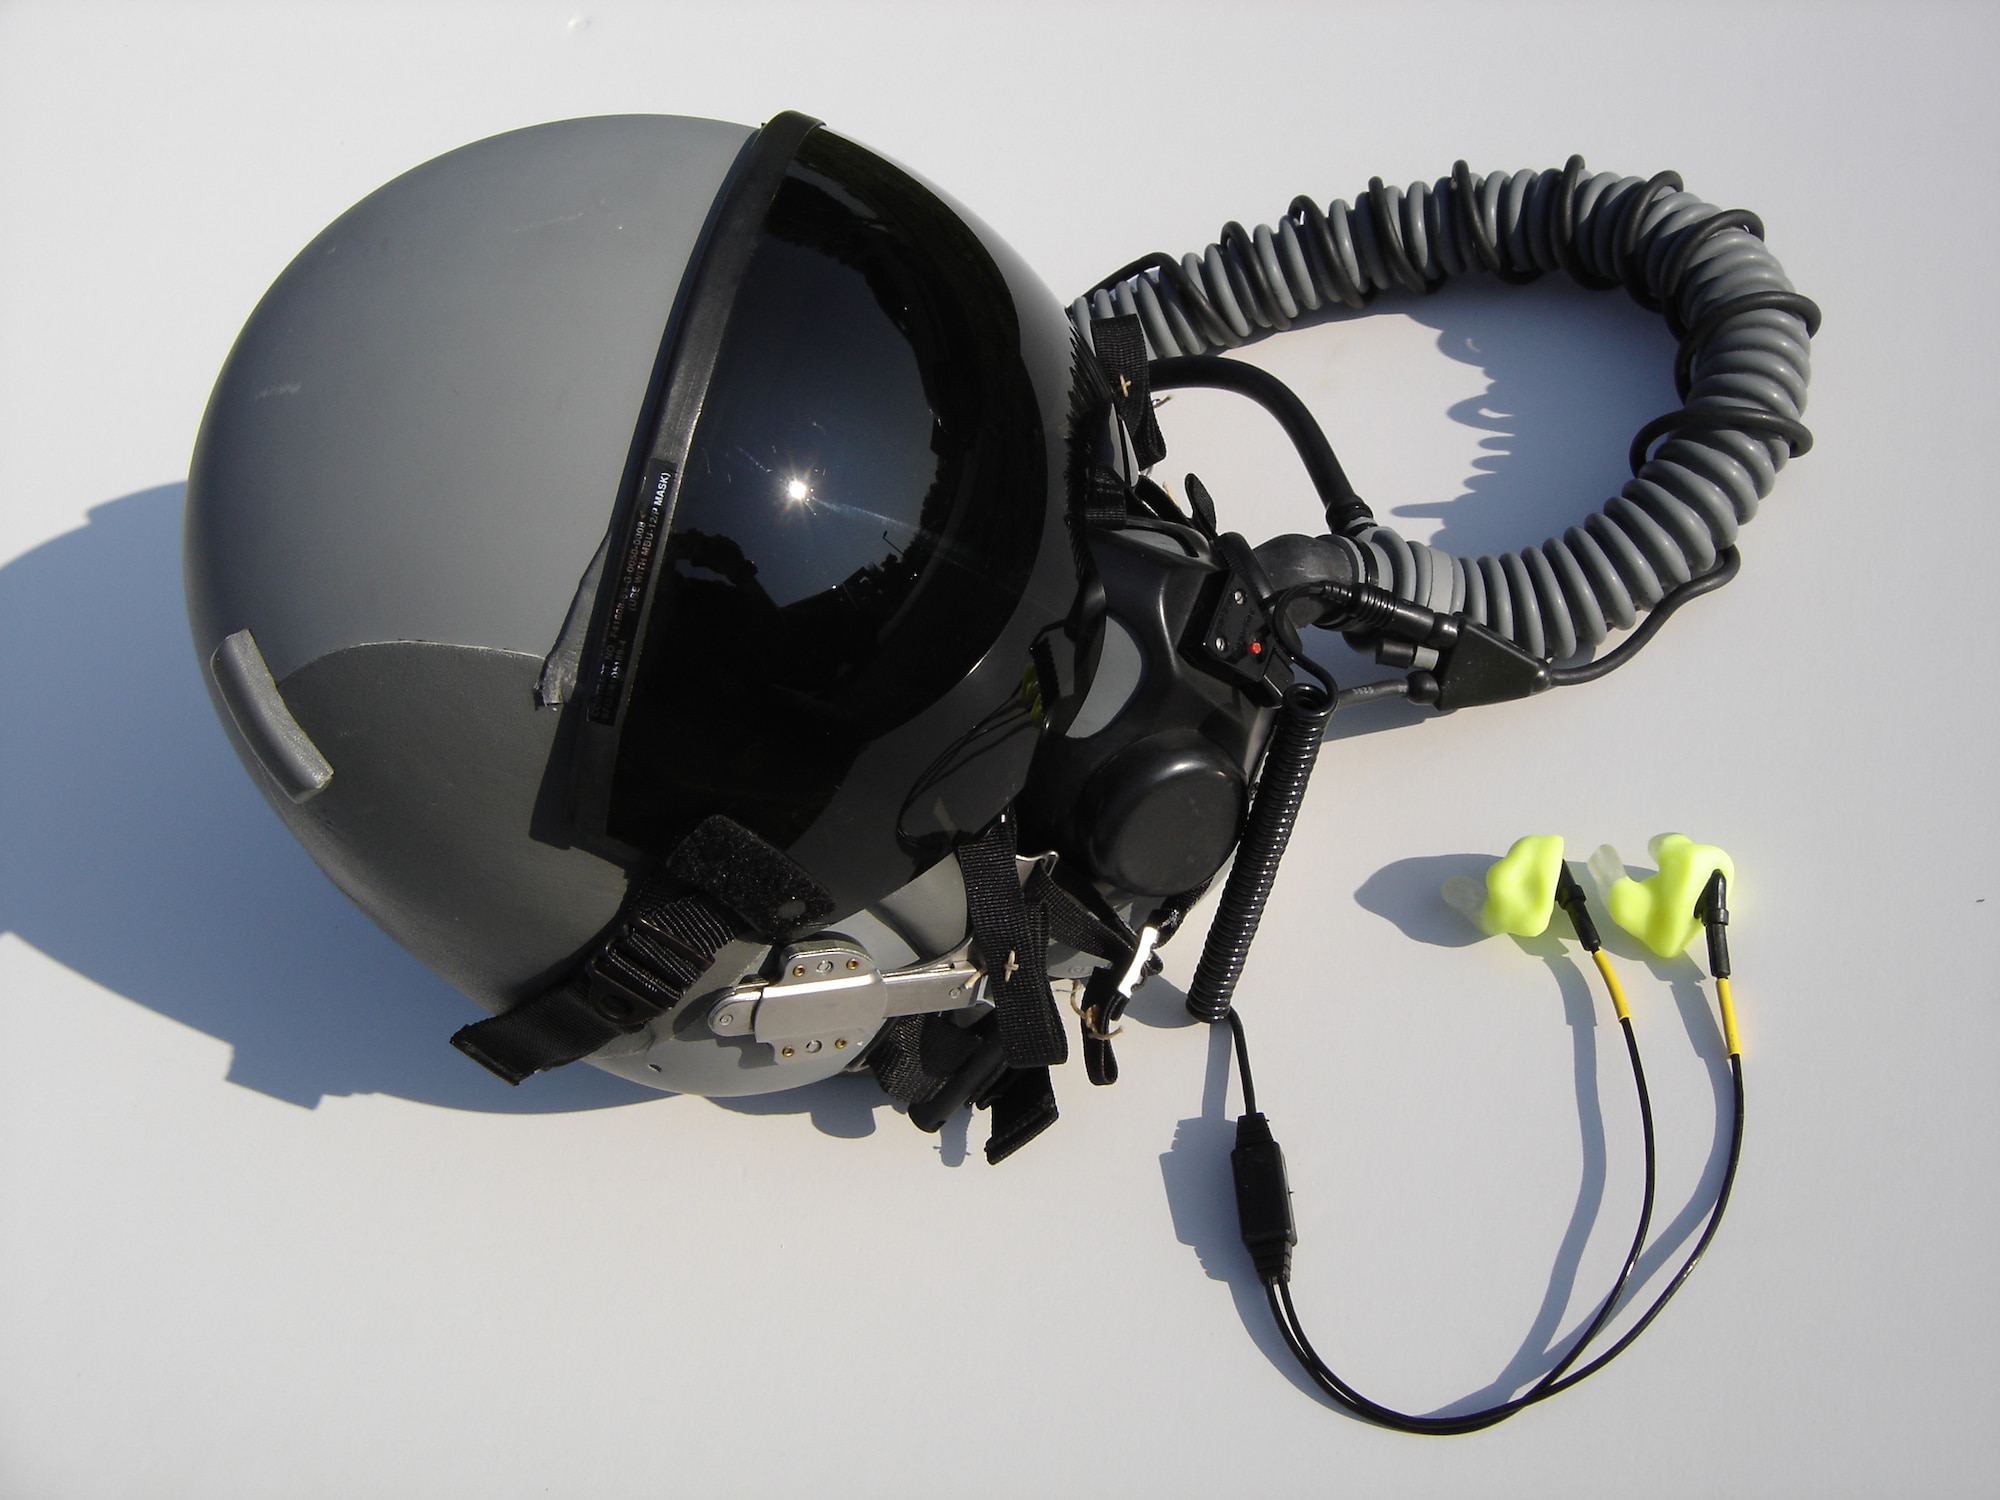 The U.S. Patent and Trademark Office has awarded a patent to the U.S. Air Force for its award-winning Attenuating Custom Communications Earpiece System (ACCES®). (Air Force photo)